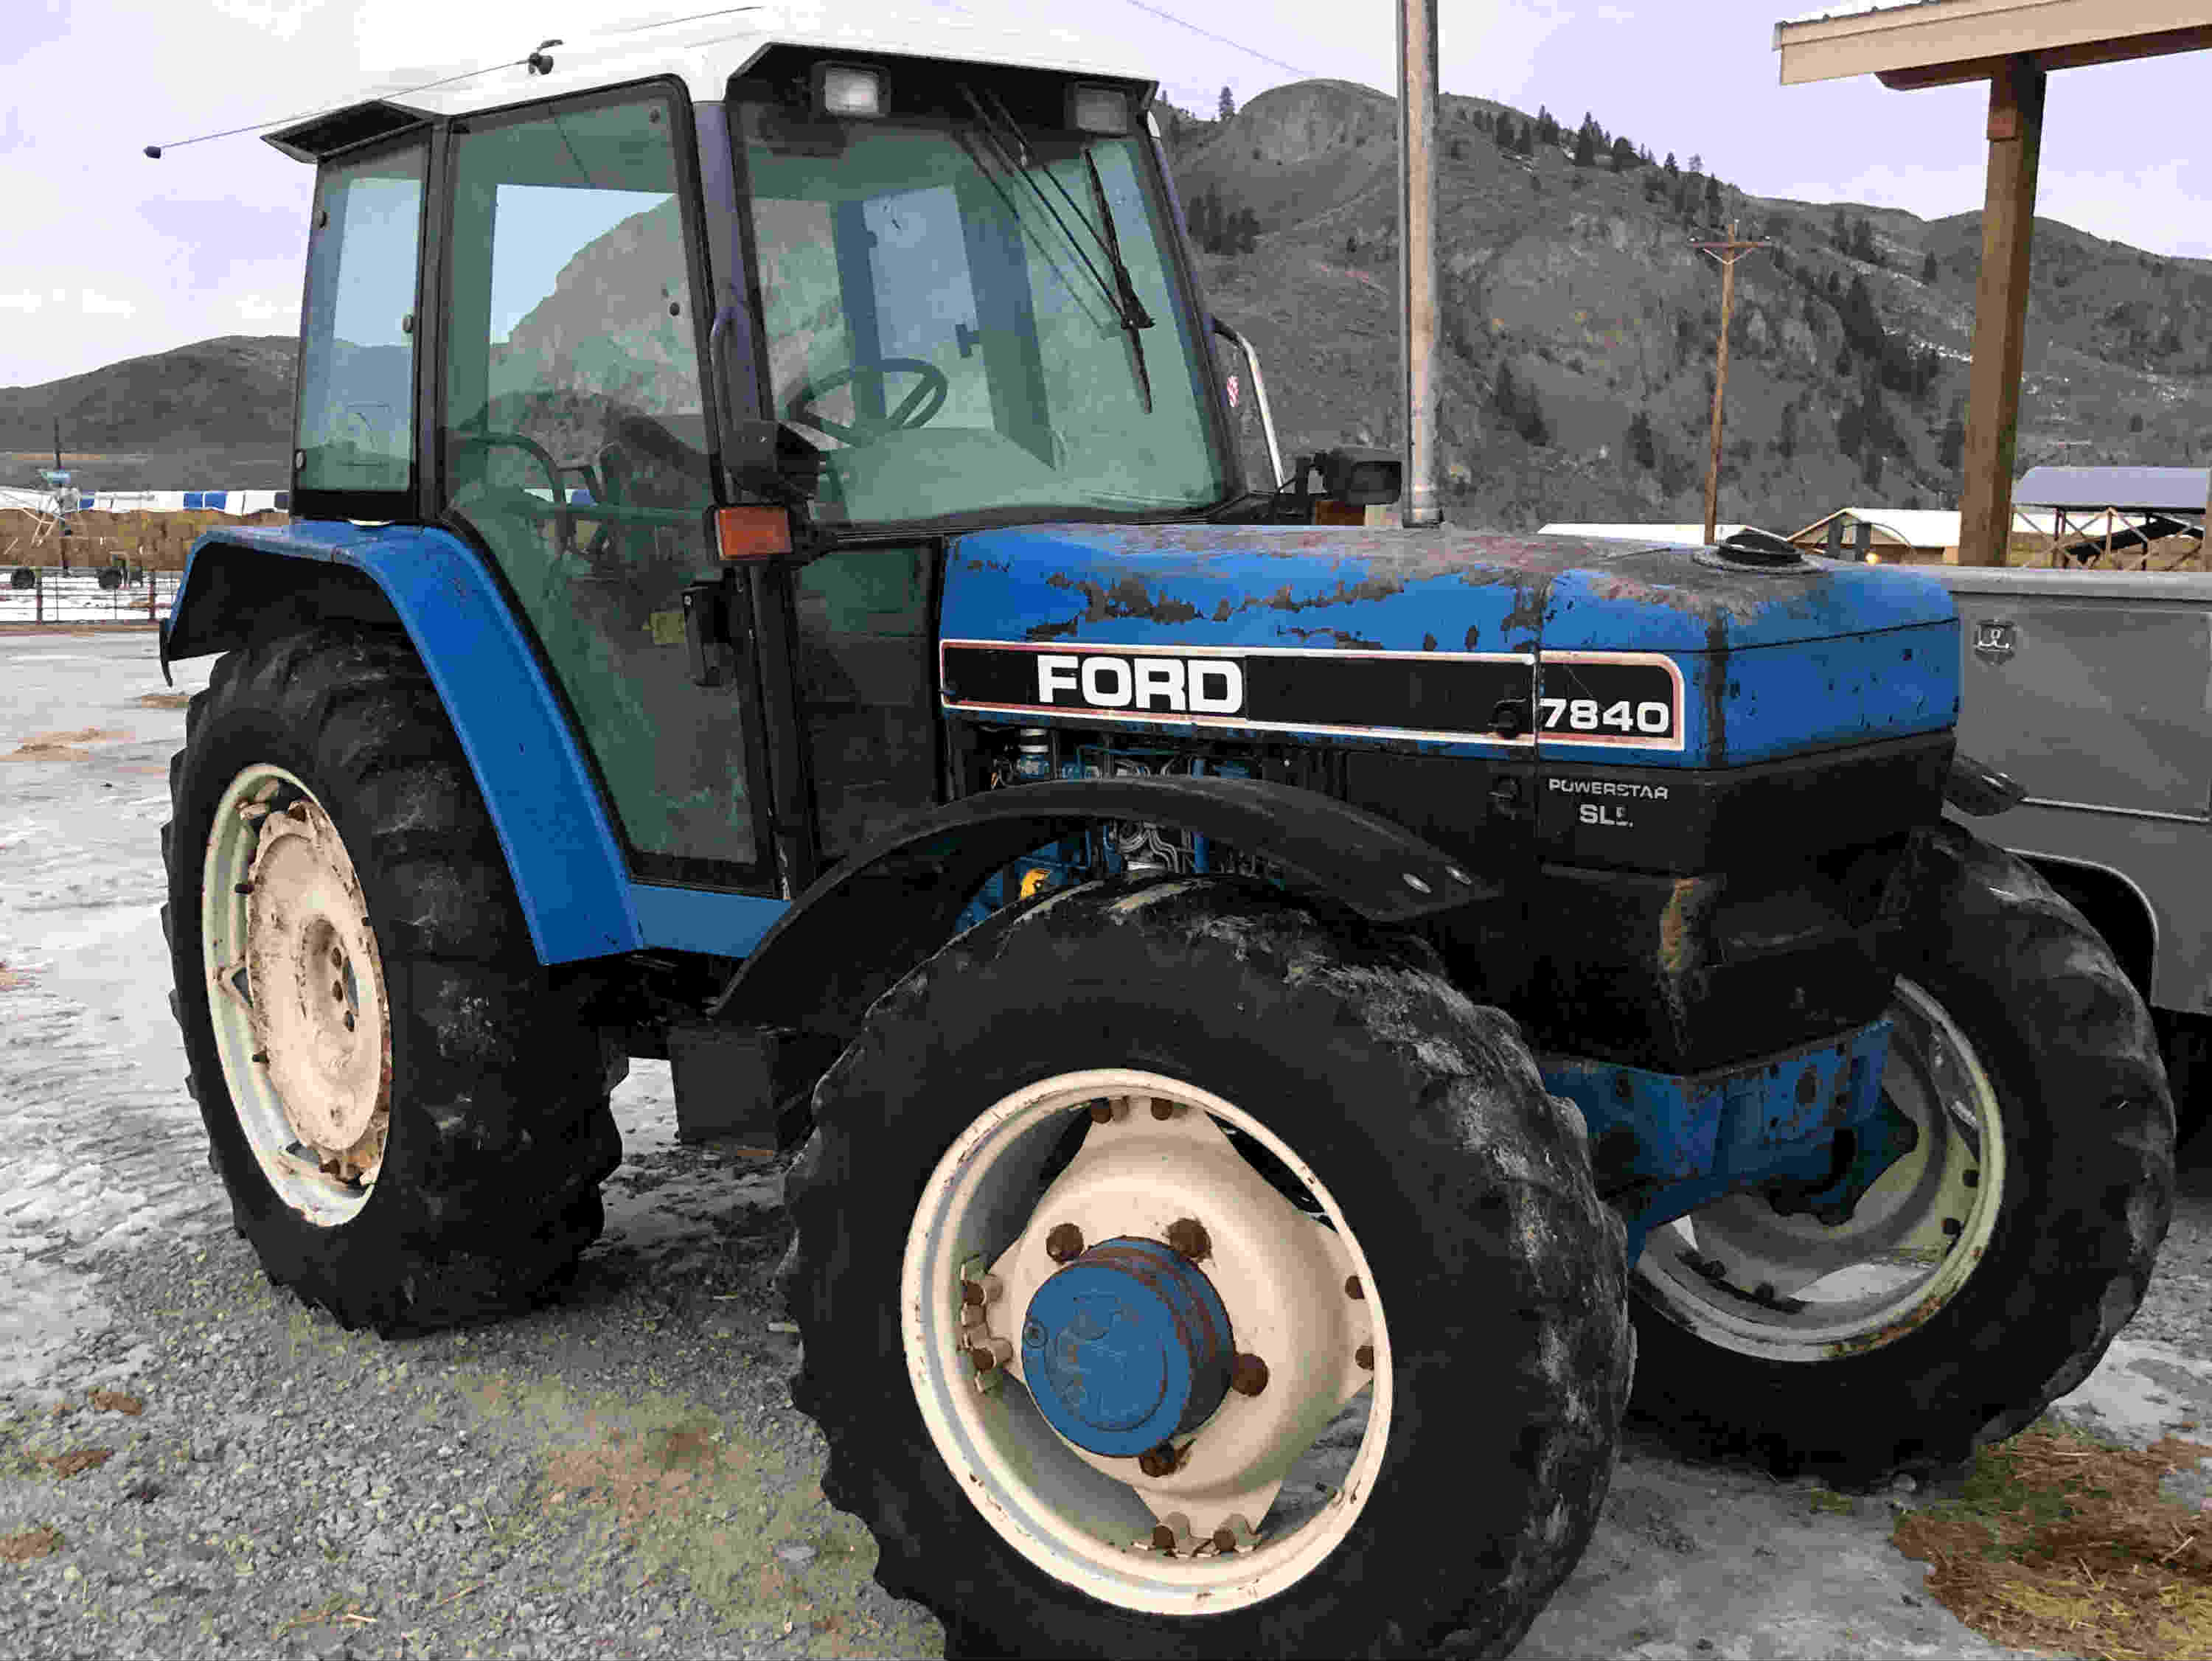 7840 ford tractor